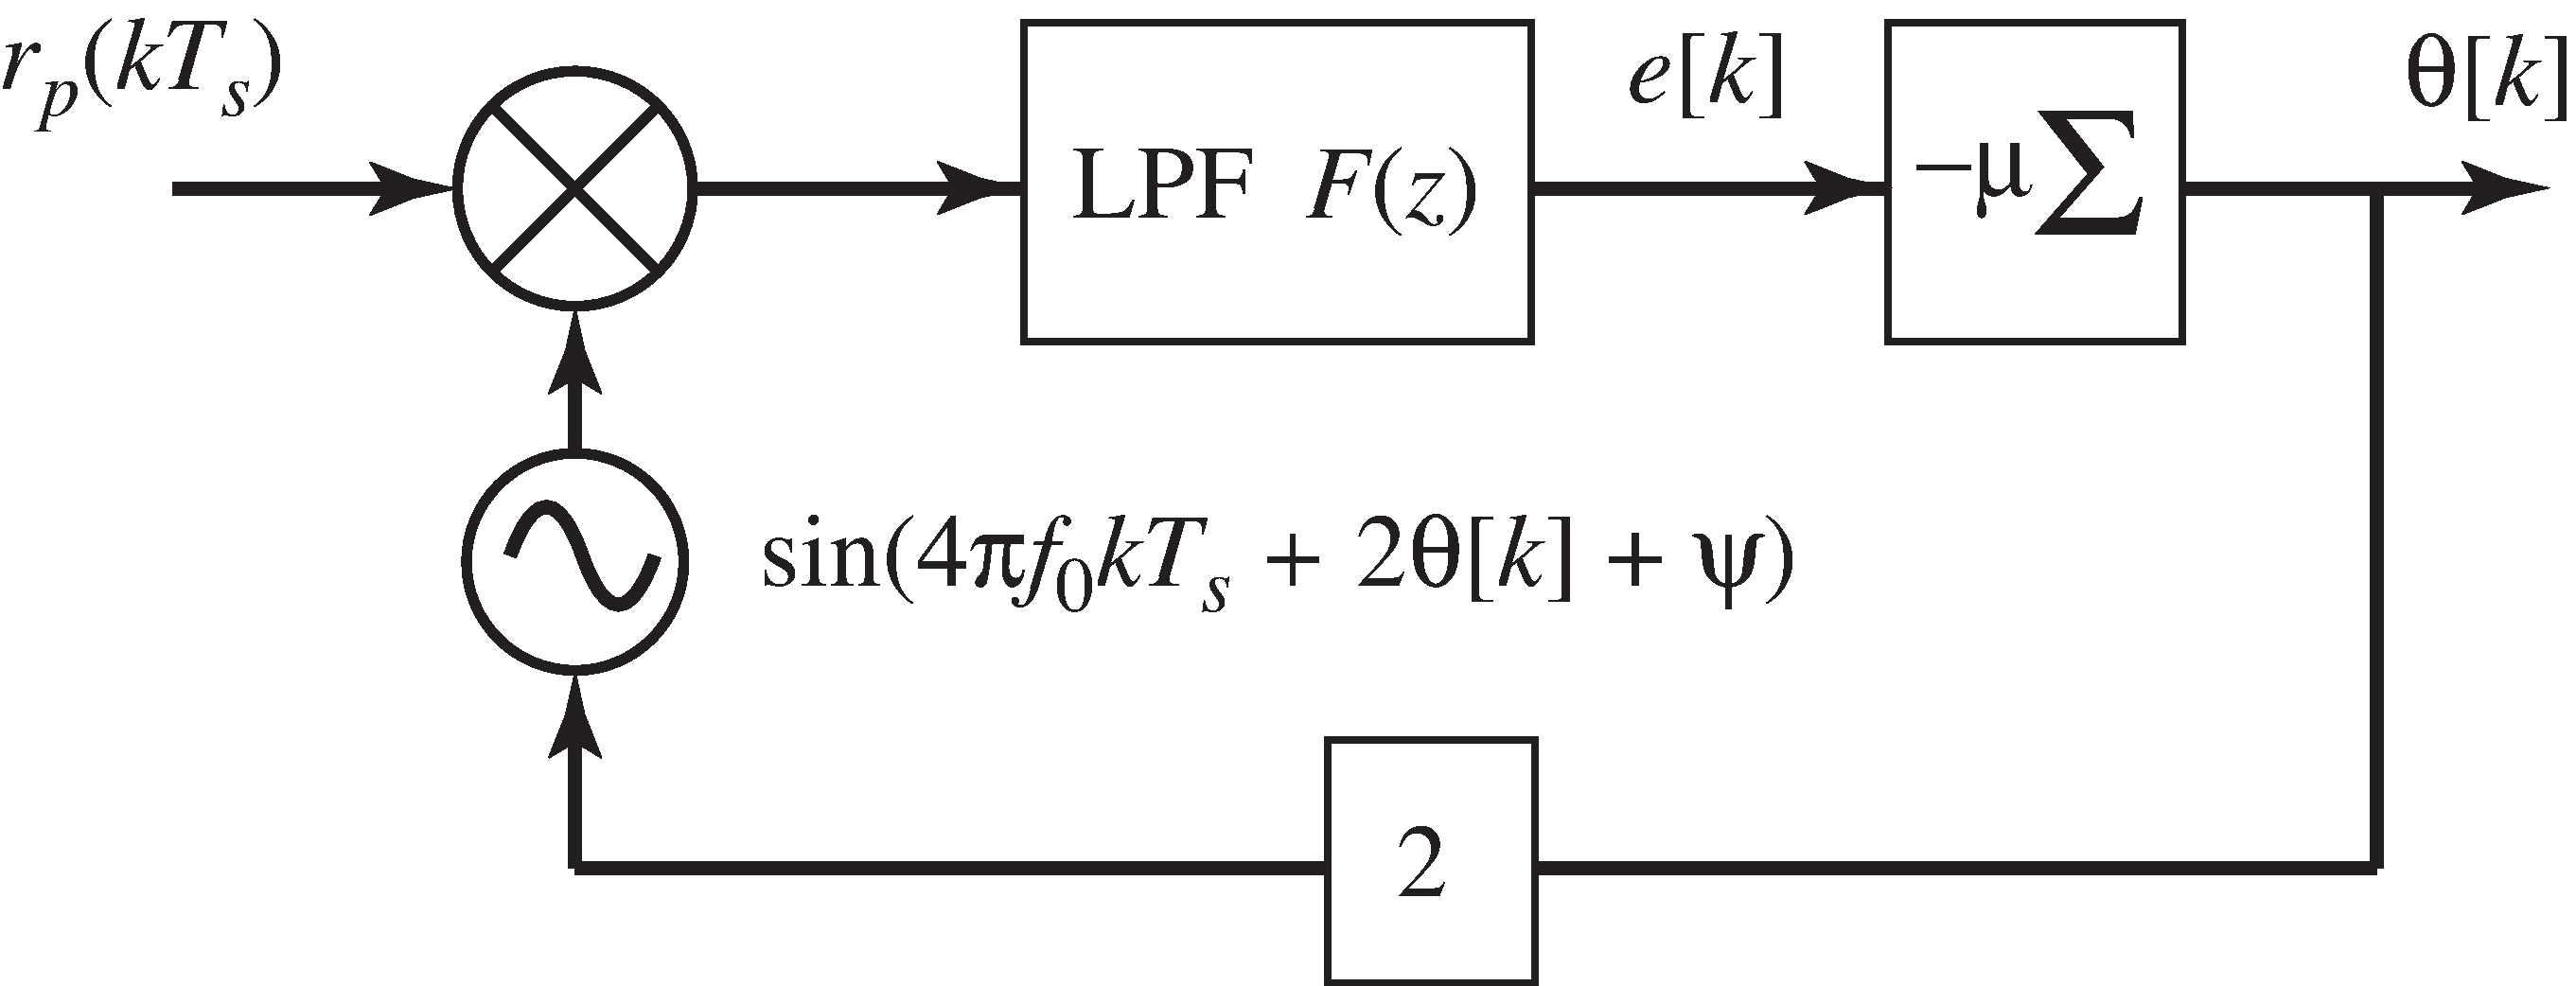 A block diagram of the digital phase locked loop algorithm Equation 24. The input signal r_p(kT_s) has already been preprocessed to emphasize the carrier as in Figure 10-3. The sinusoid mixes with the input and shifts the frequencies; after the LPF only the components near DC remain. The loop adjusts θ to maximize this low frequency energy.